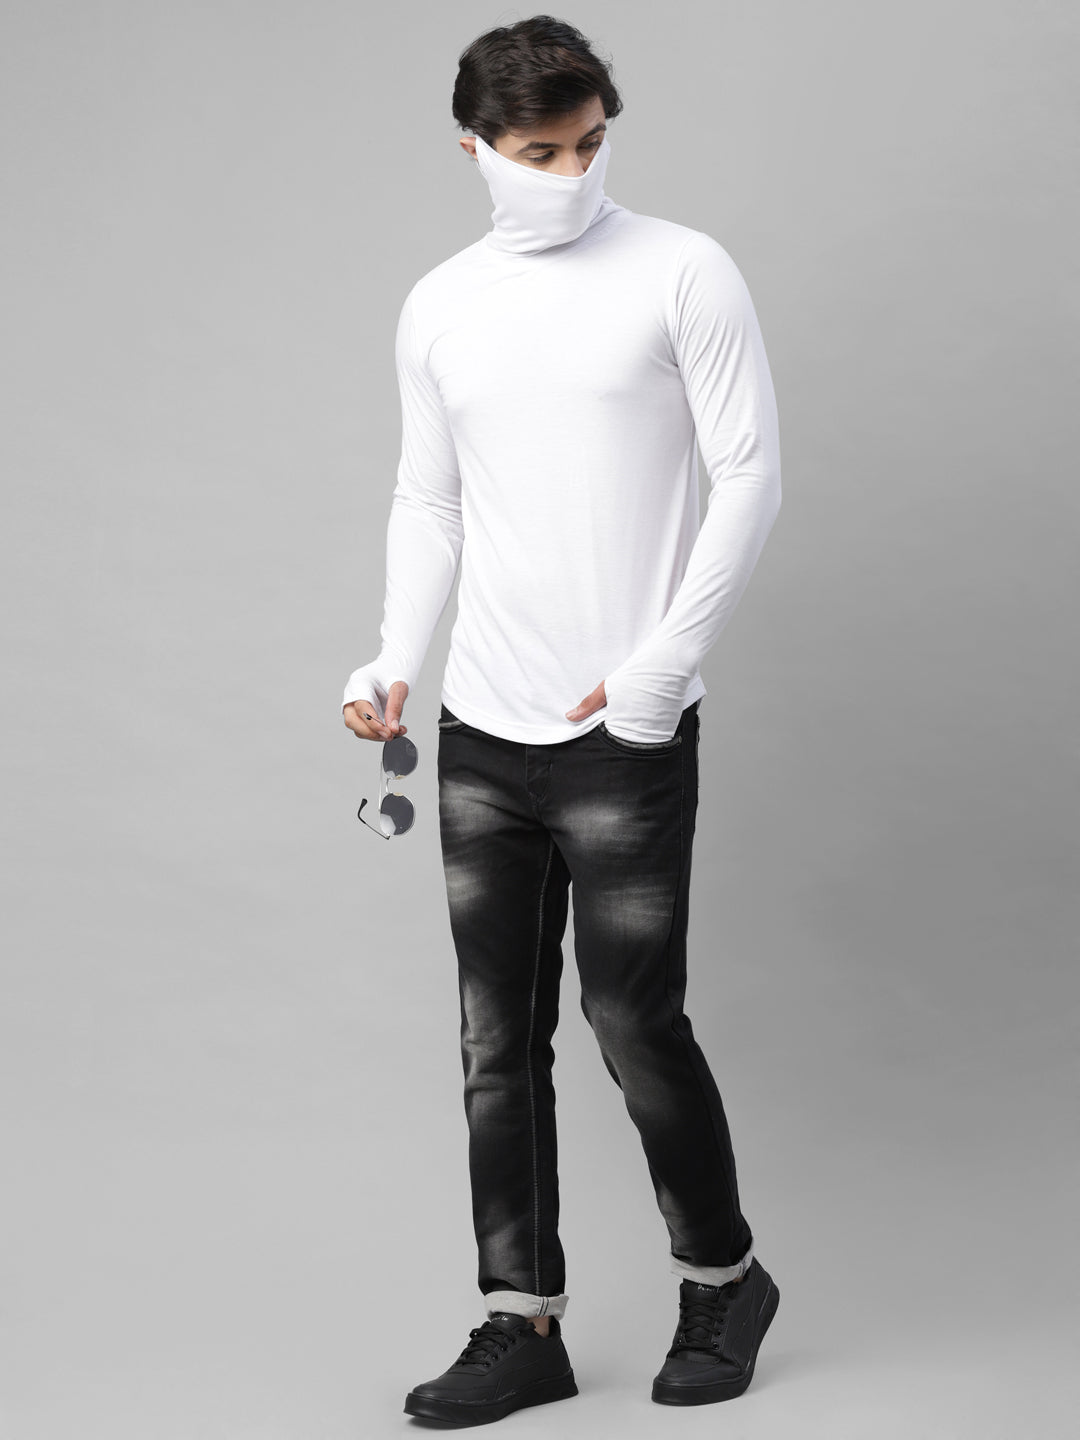 TORRIDO 5555 ROUND NECK FULL SLEEVE GENTS TOP WHITE PACK OF 1